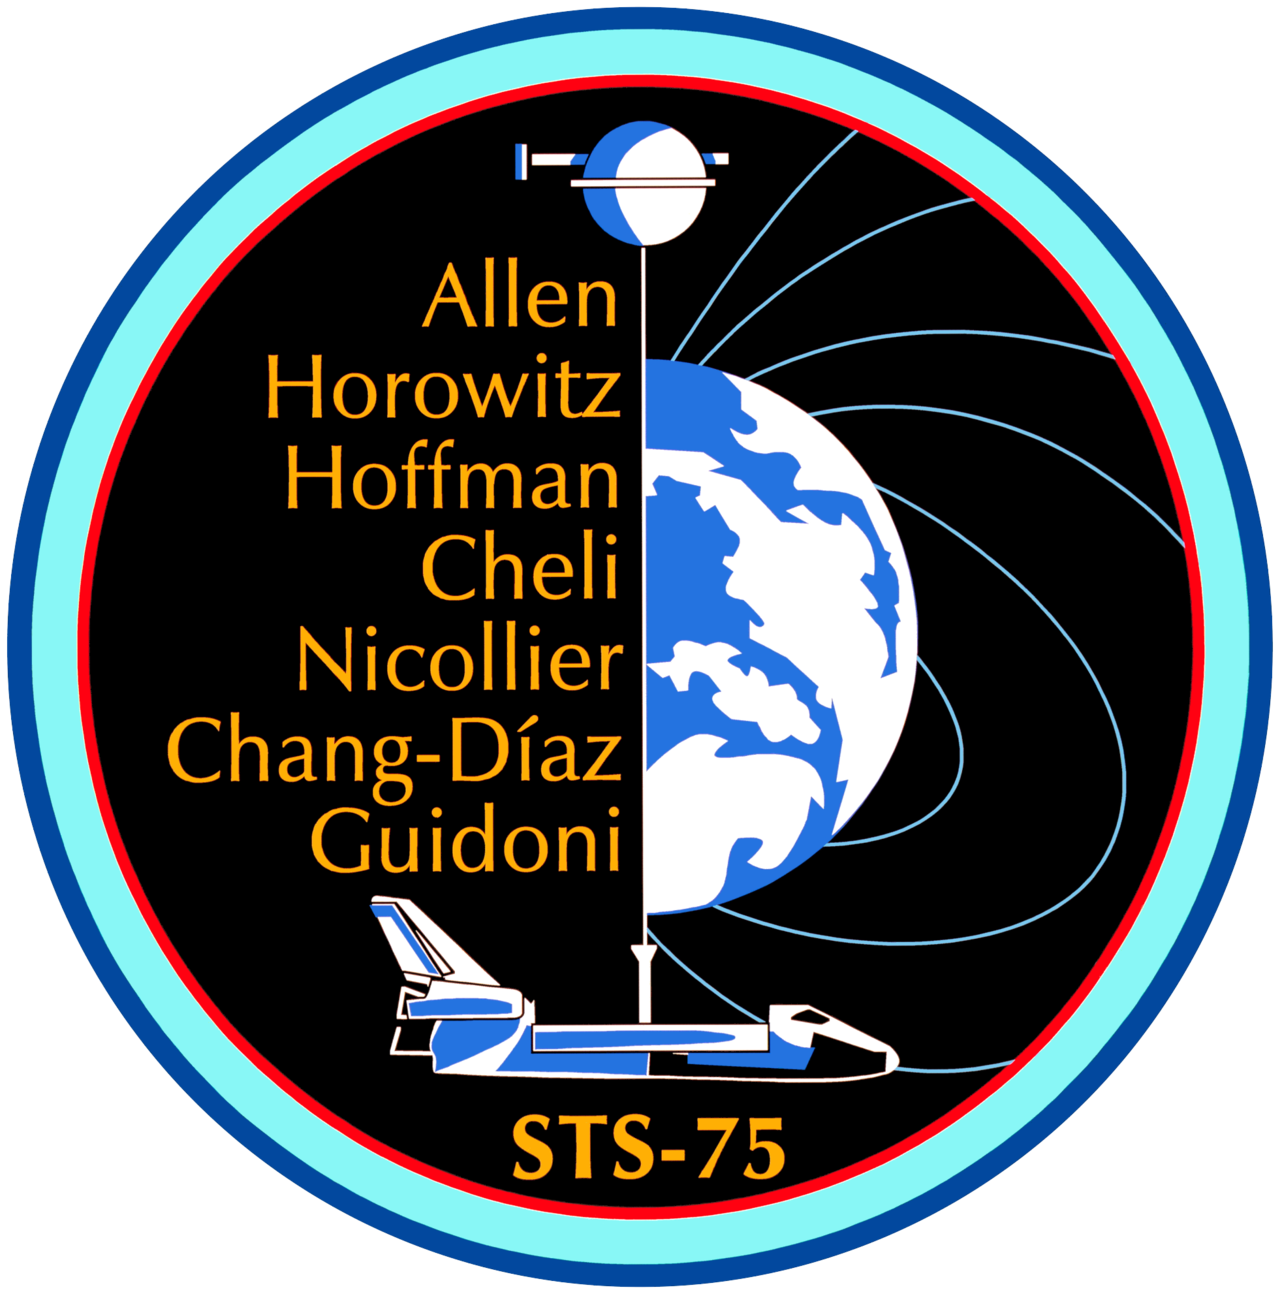 Mission patch for STS-75